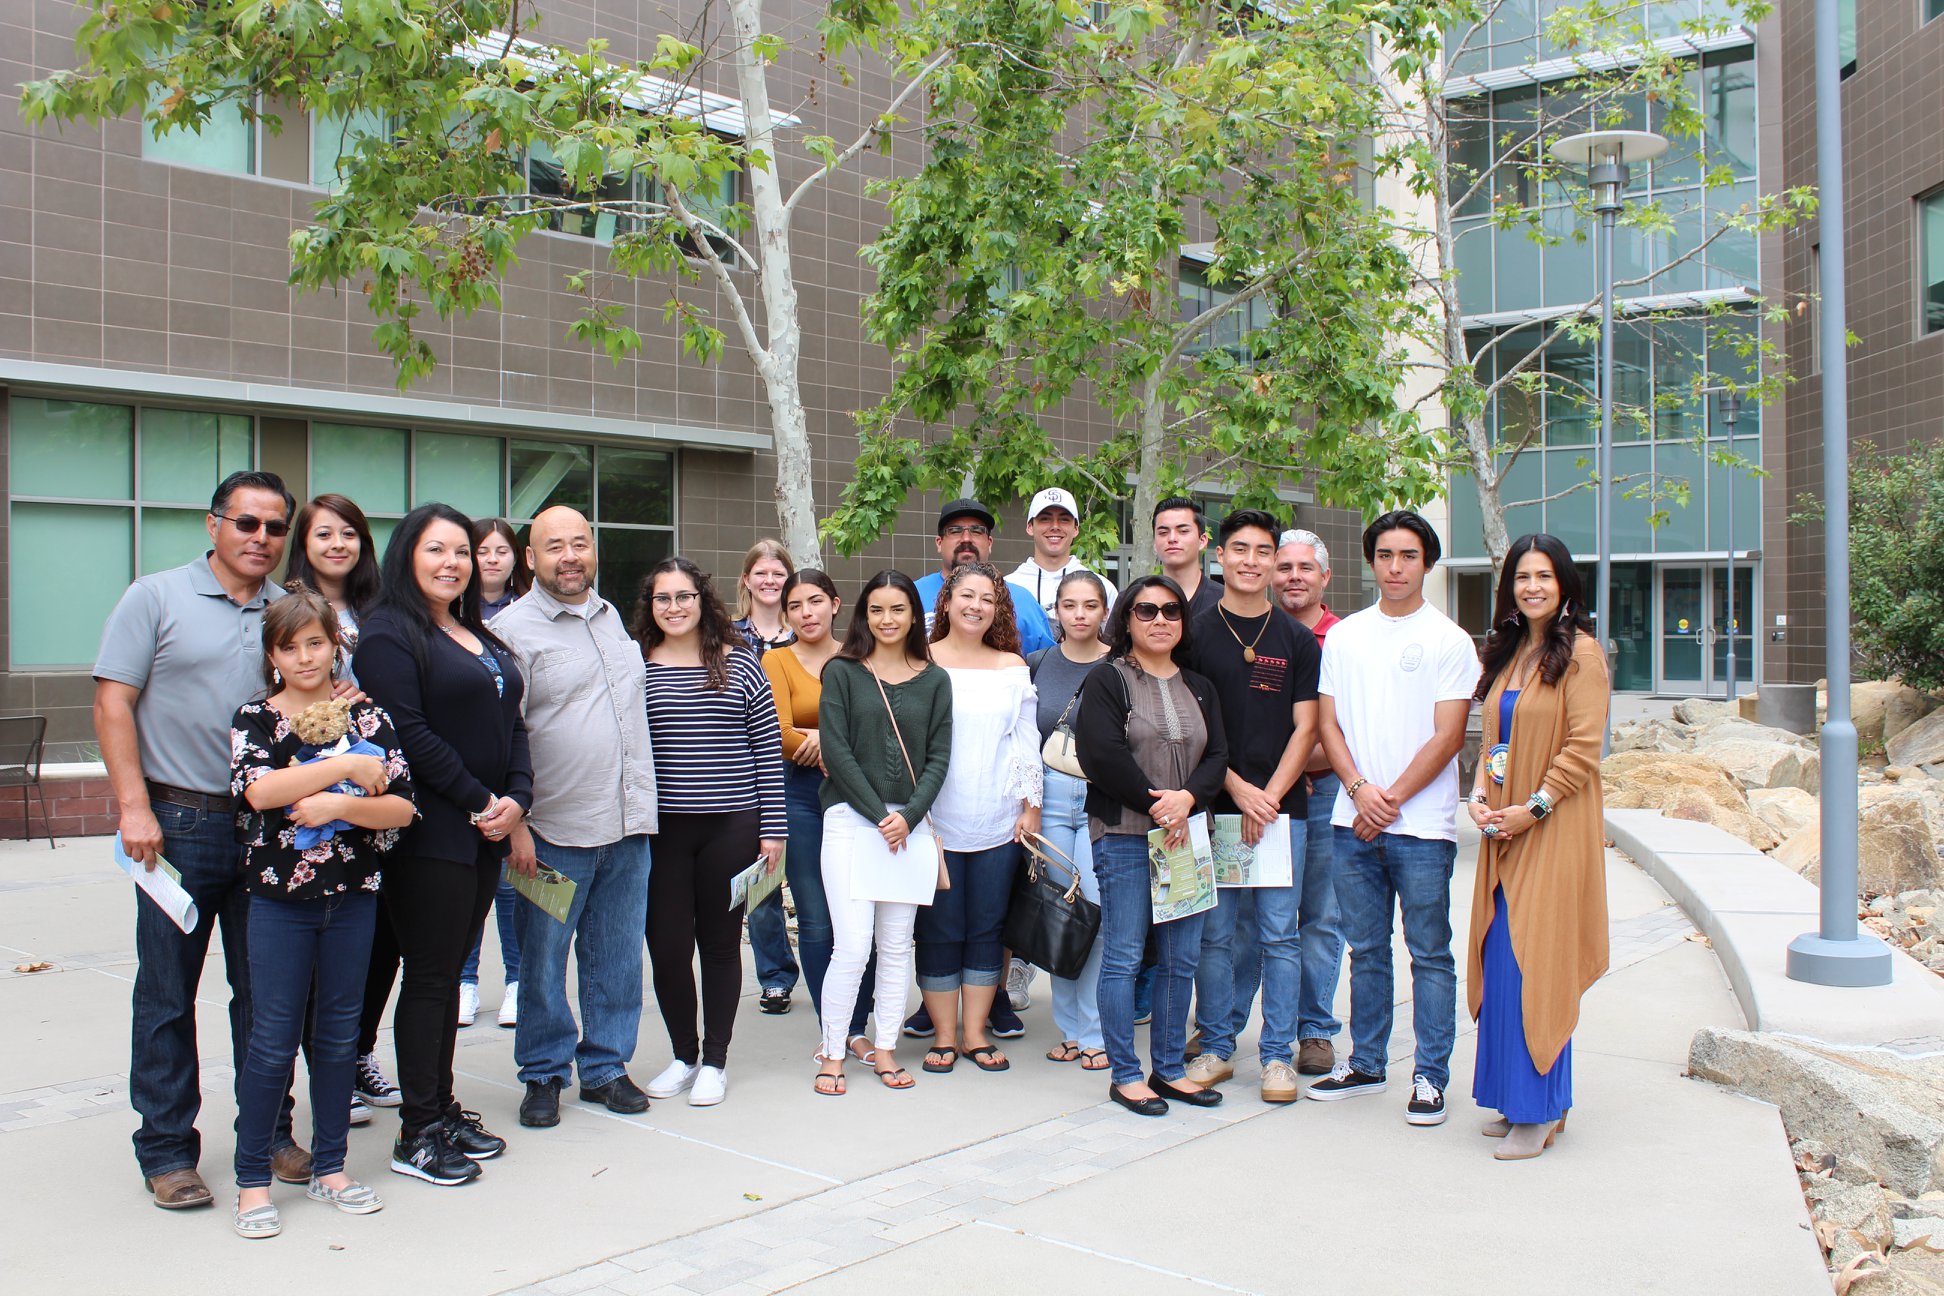 Group of parents, students, and staff standing outside in a courtyard in front of a university building